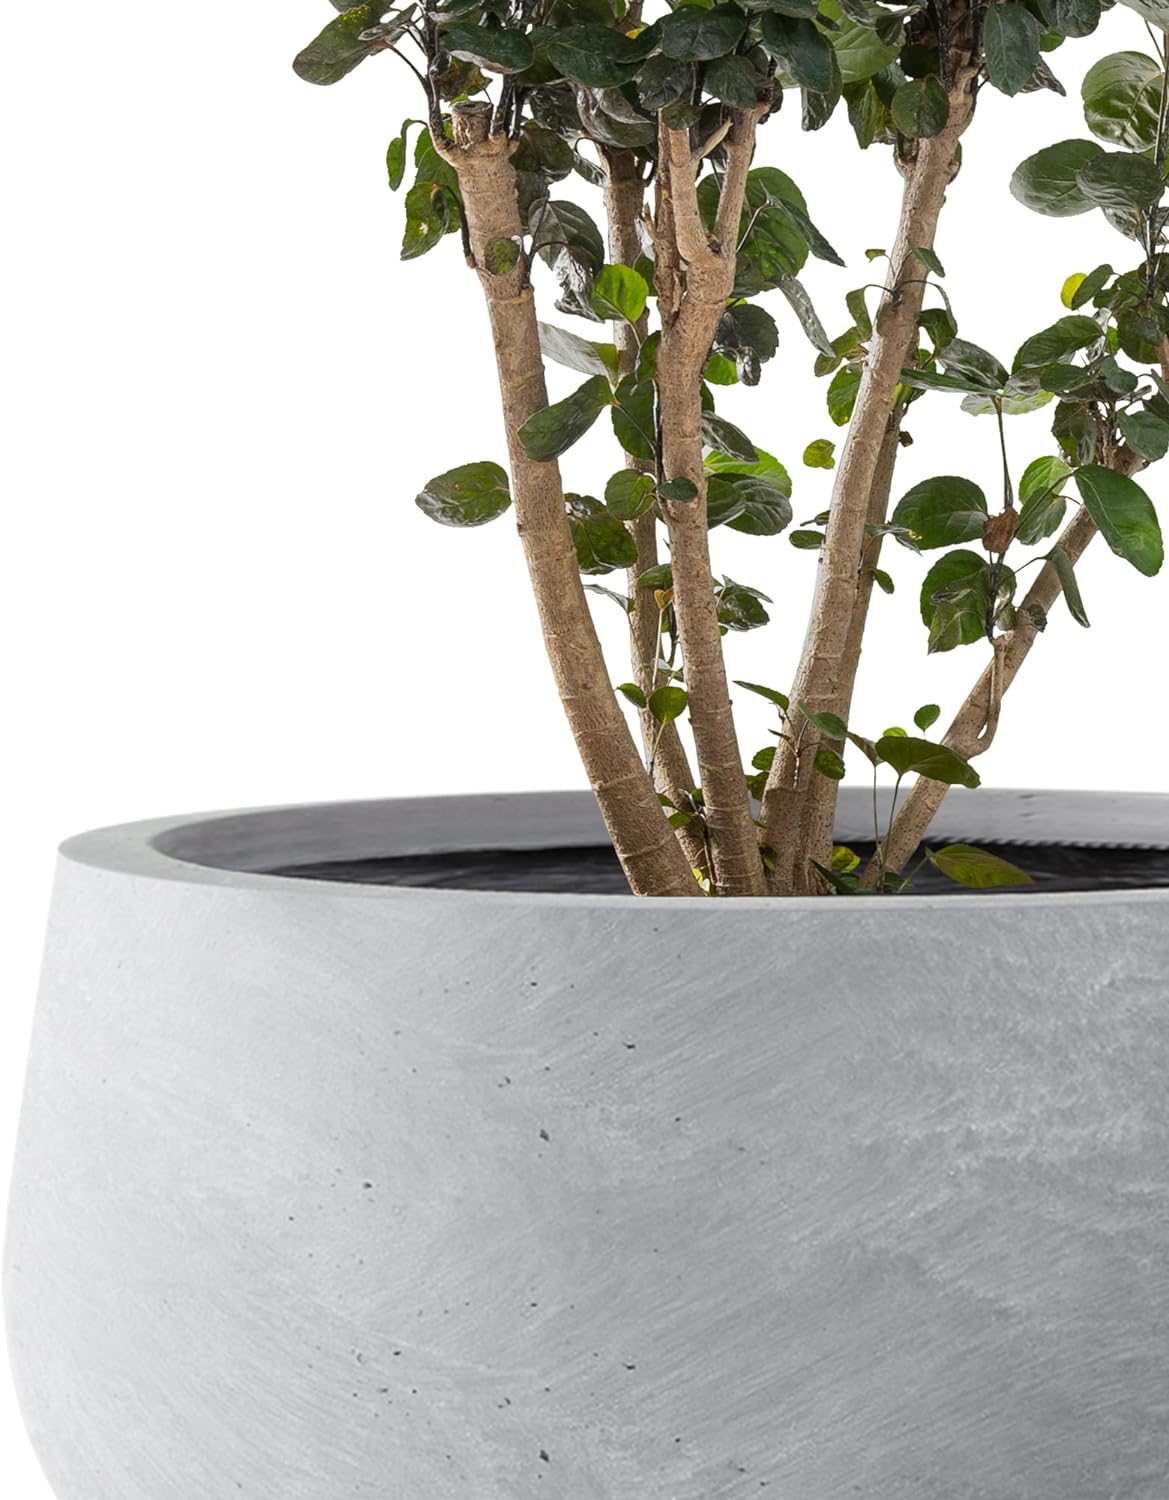 Kante 19.6" Dia Round Concrete Planter, Outdoor Indoor Garden Plant Pots with Drainage Hole and Rubber Plug, Modern Curvaceous Design, Iron Oxide